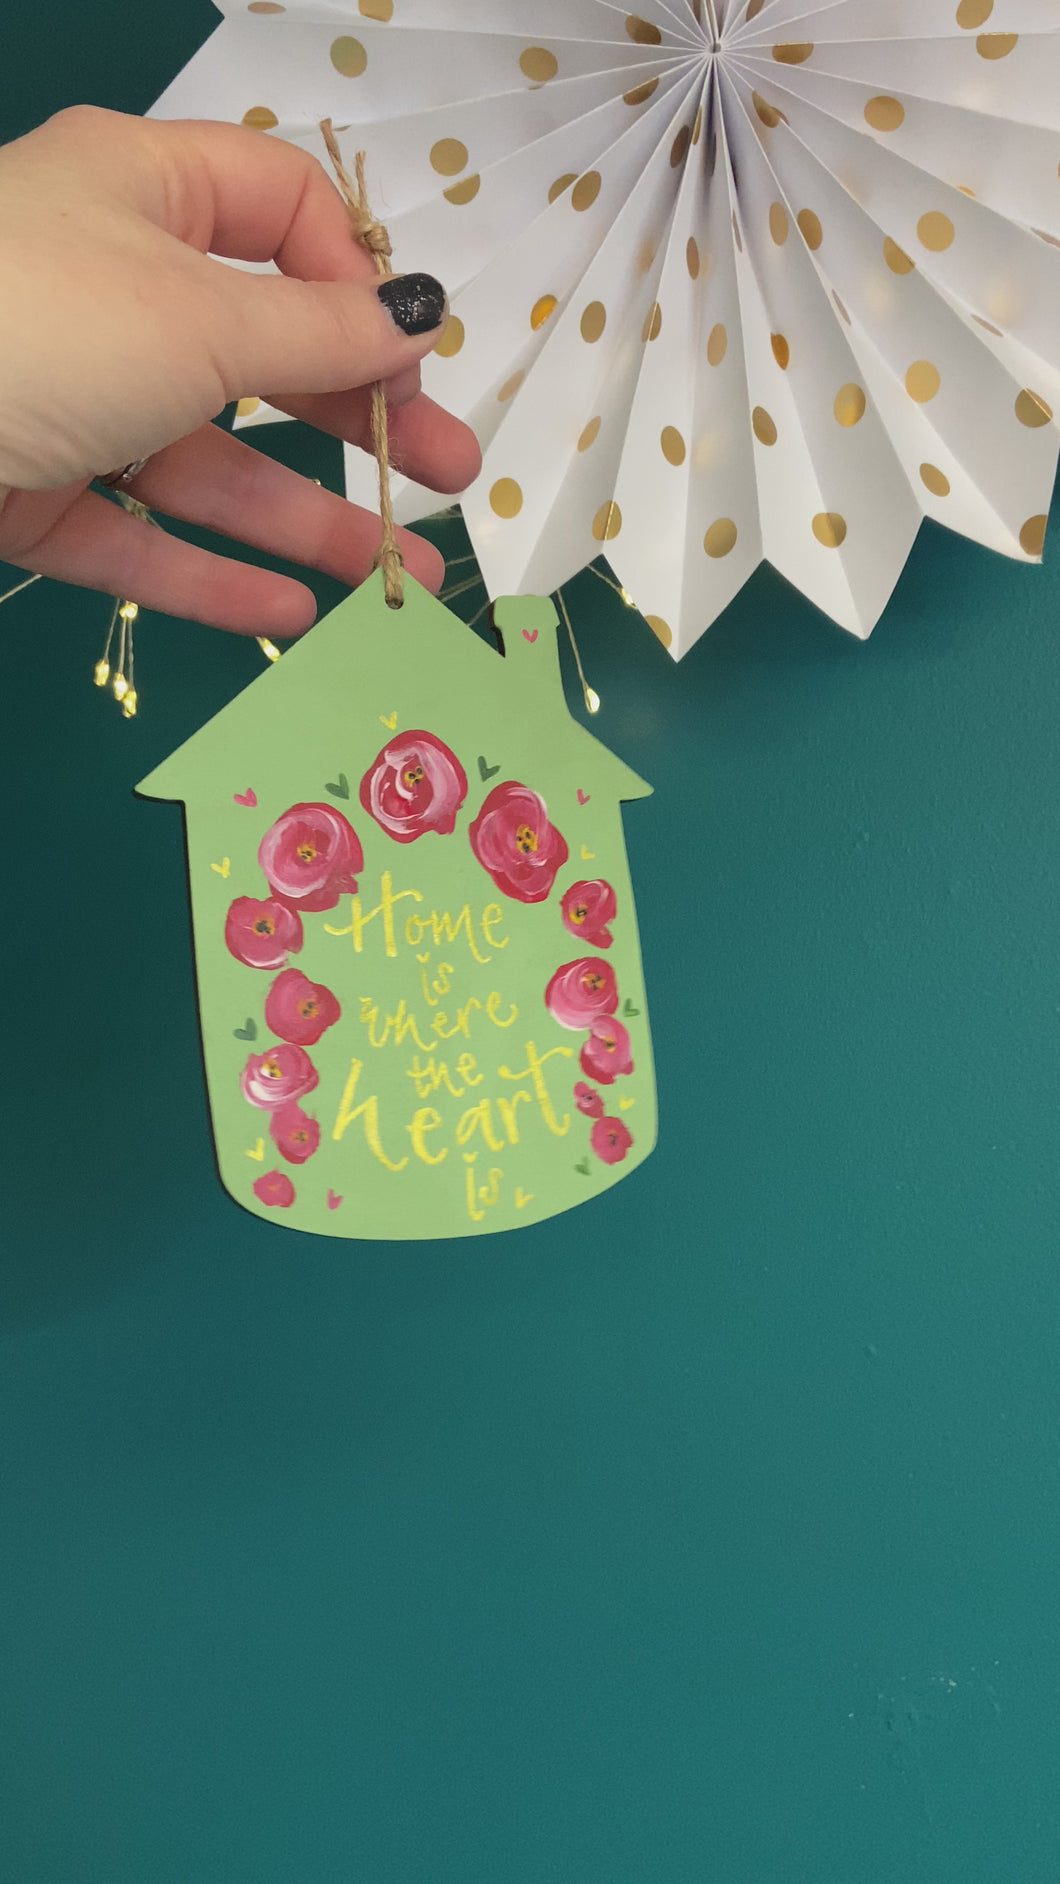 Home is where the heart is, hand painted decoration